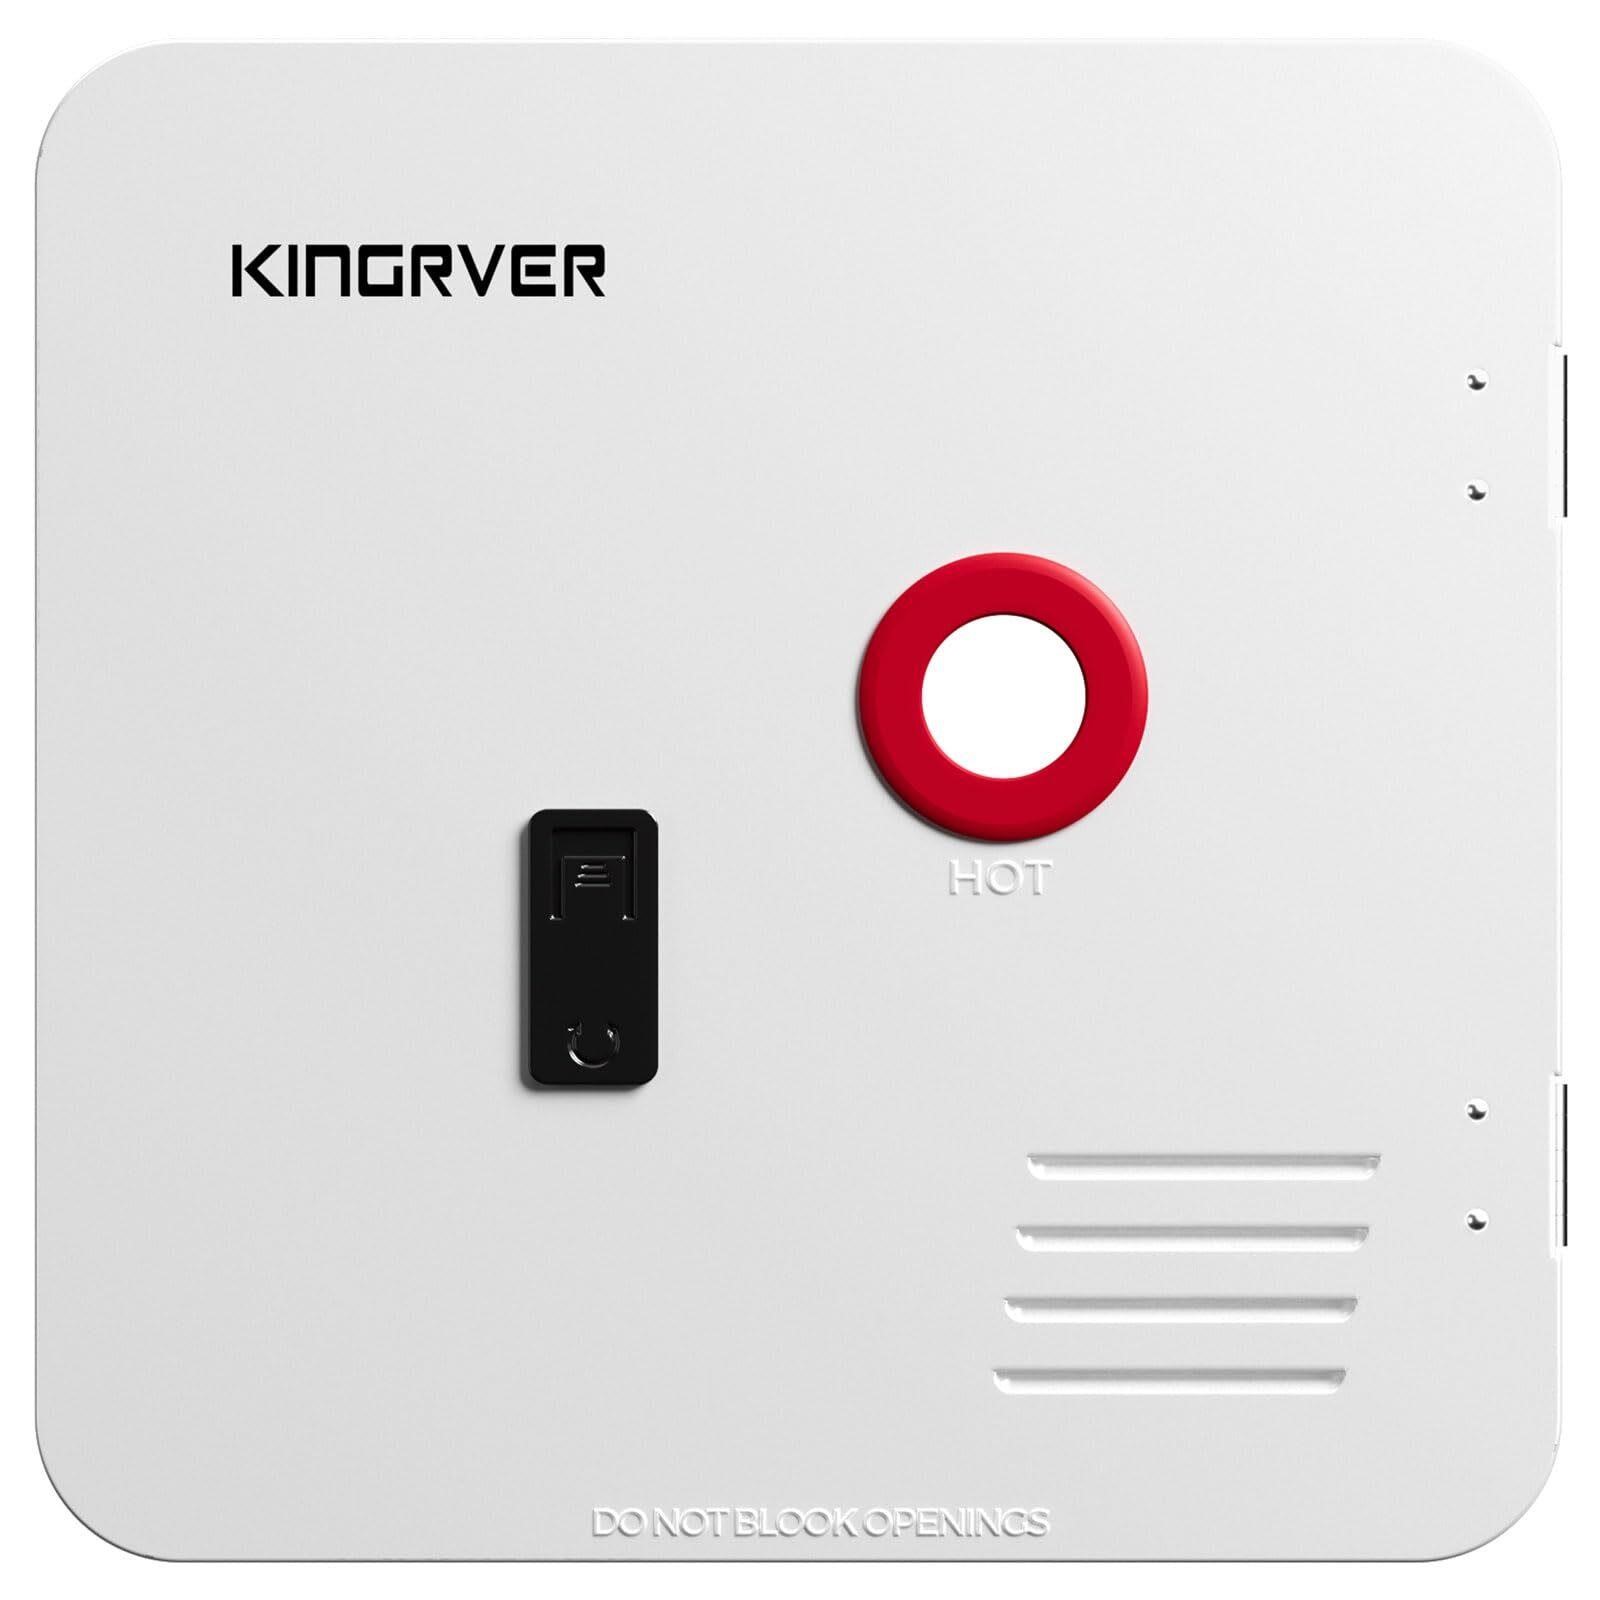 KINGRVER 18 x 18 Inches White Door kit - This Only